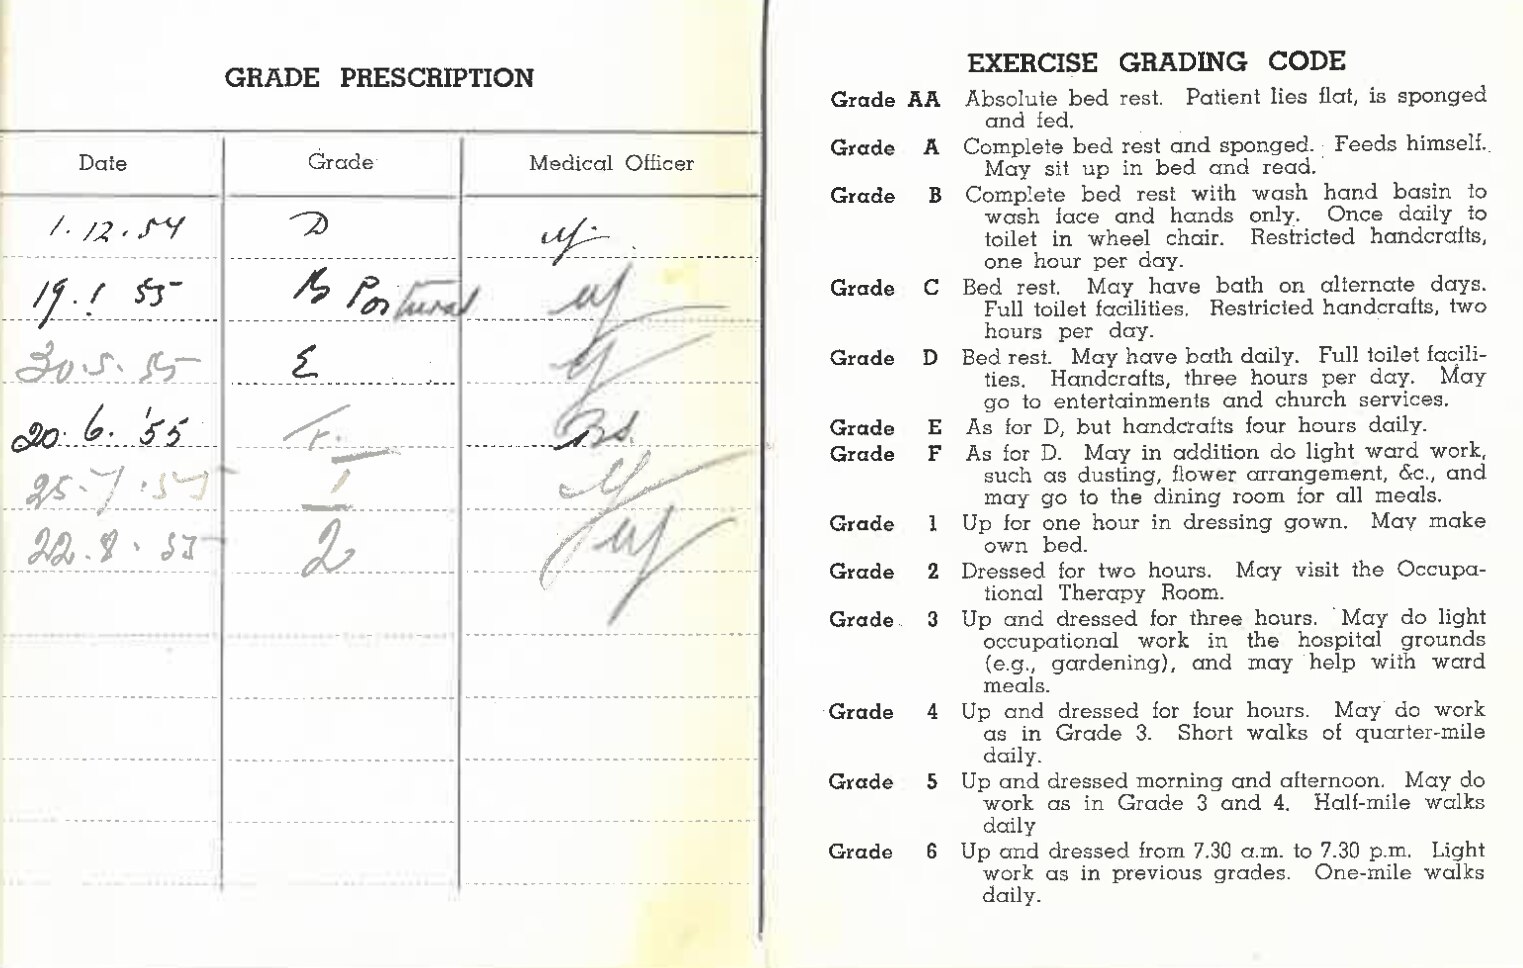 An old hospital card that grades patients with TB.